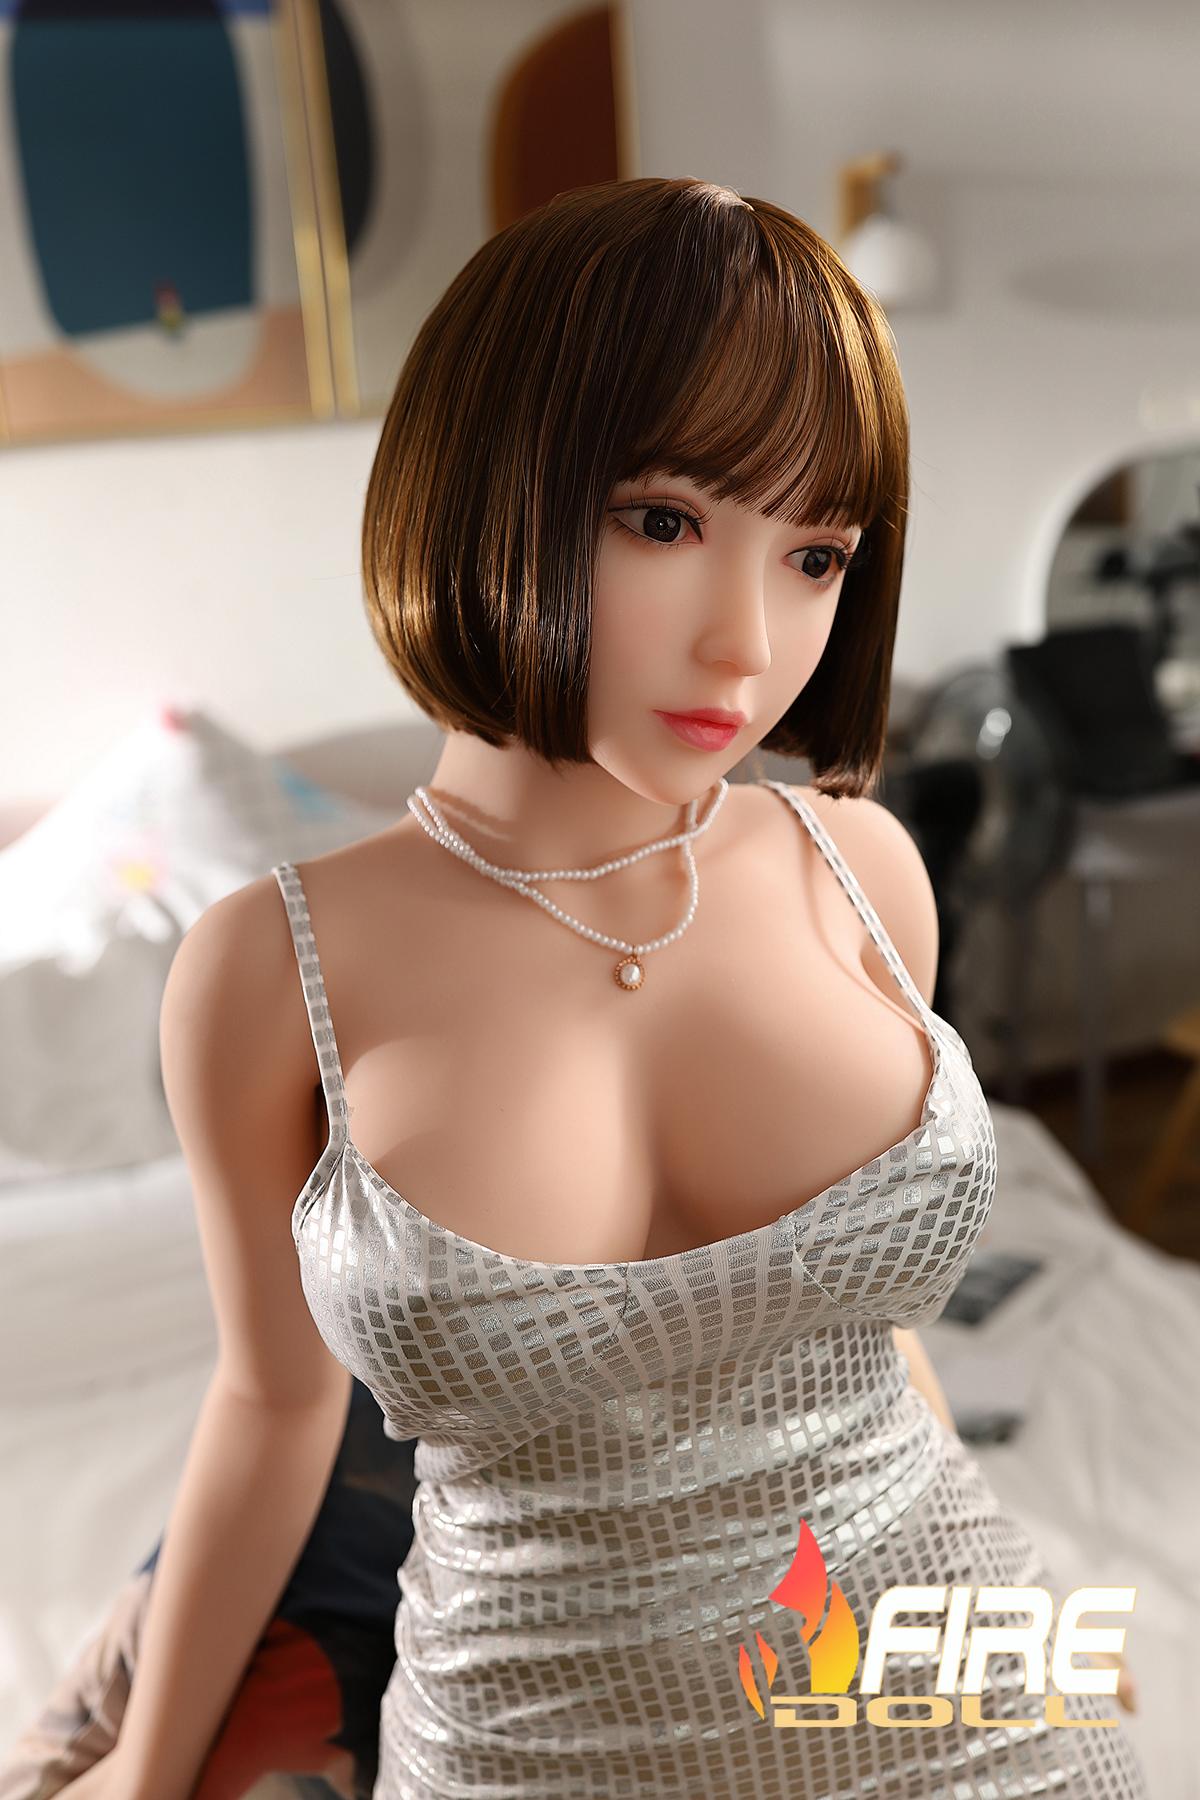 Sex doll Mola as shown | Remaining stock